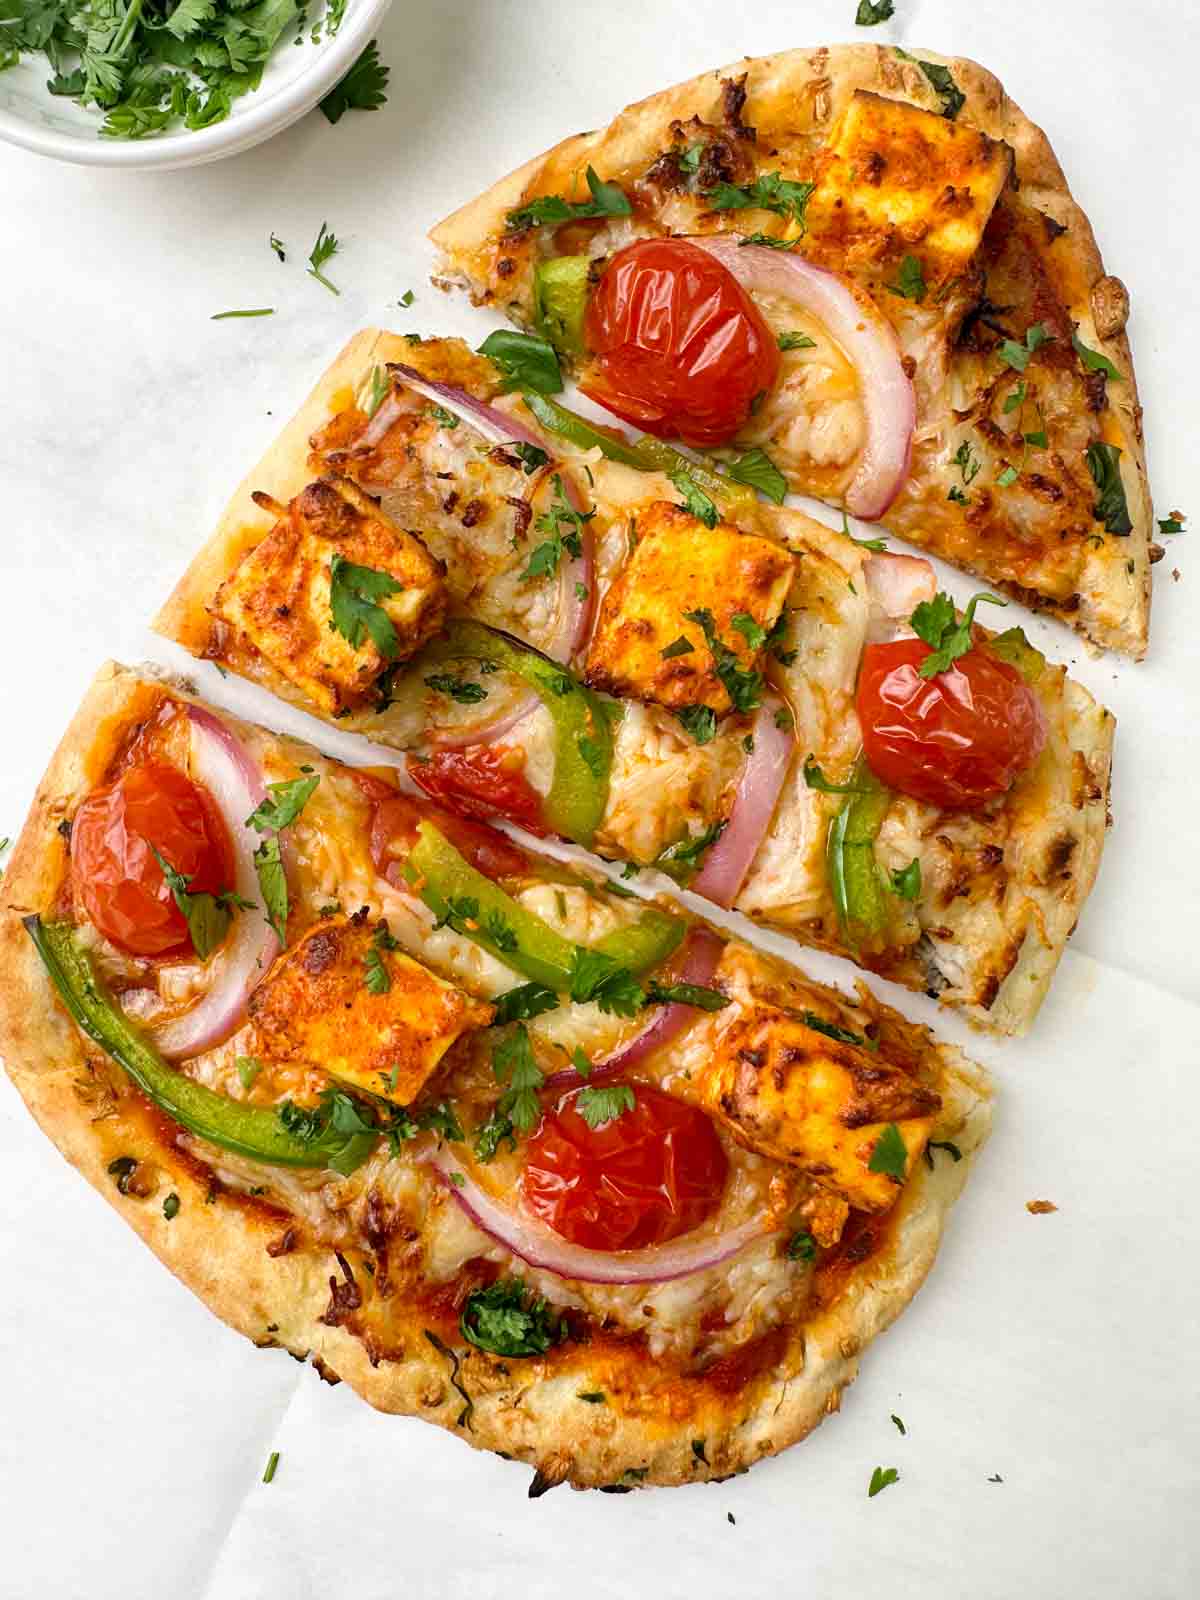 tandoori paneer naan pizza served on a sheet with coriander leaves on the side